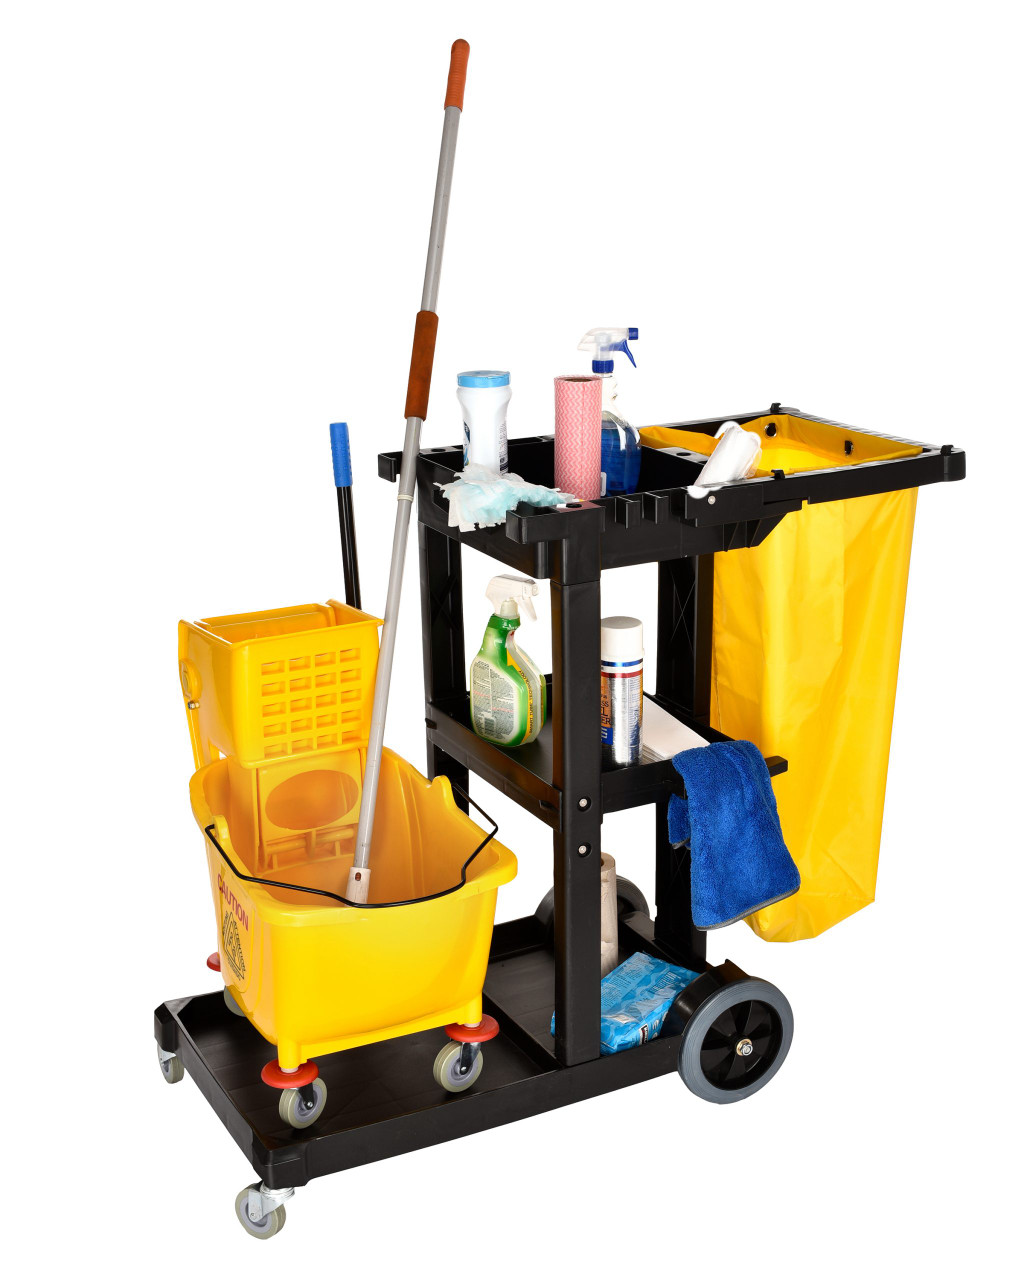 JANITORIAL CLEANING CART WITH 3 SHELVES - Cleaner Solutions Inc.